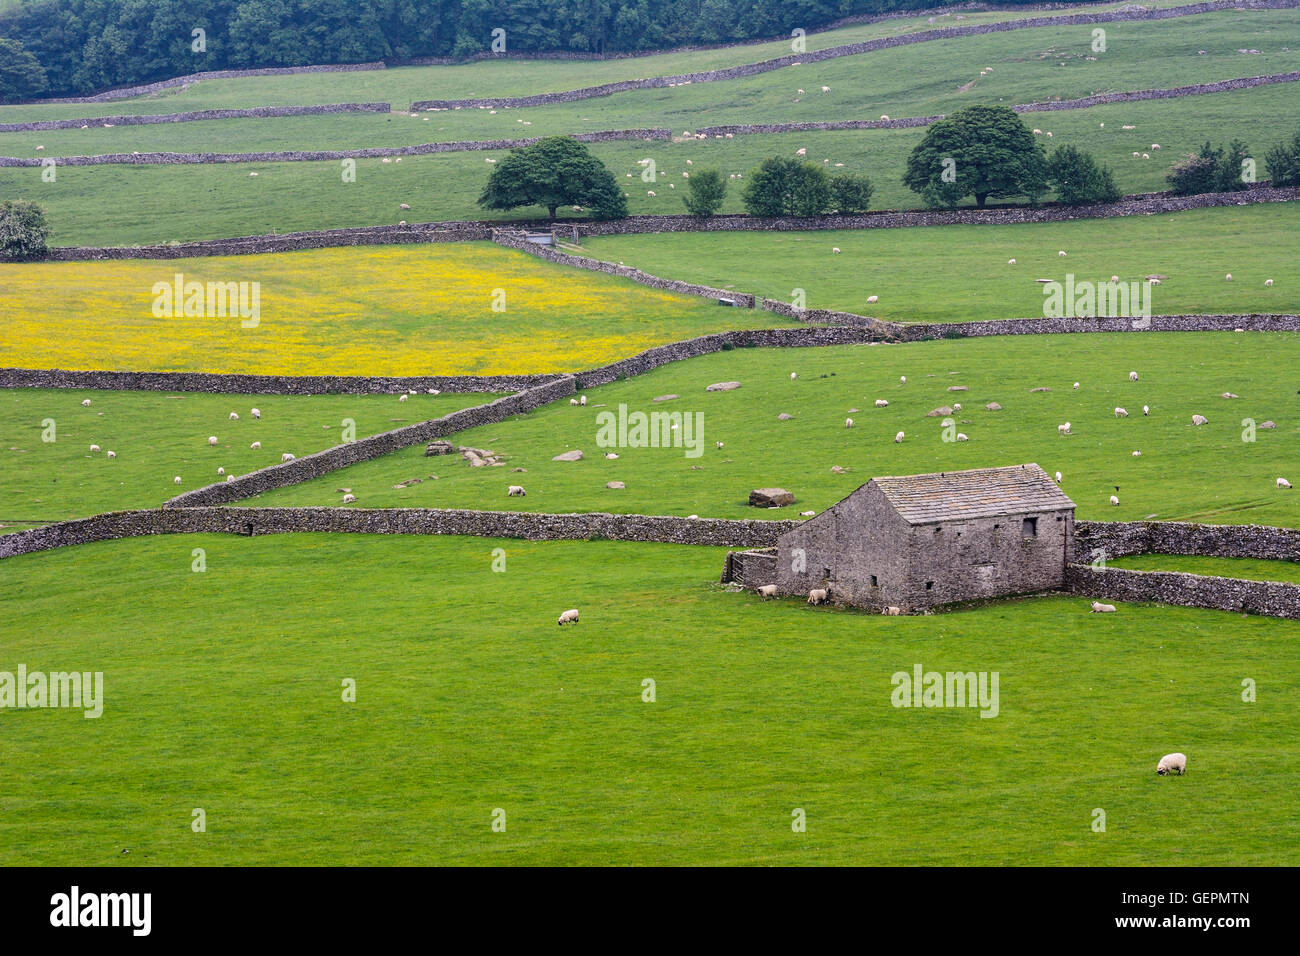 North Yorkshire landscape in the Yorkshire Dales National Park near the village of Austwick near Settle. Stock Photo